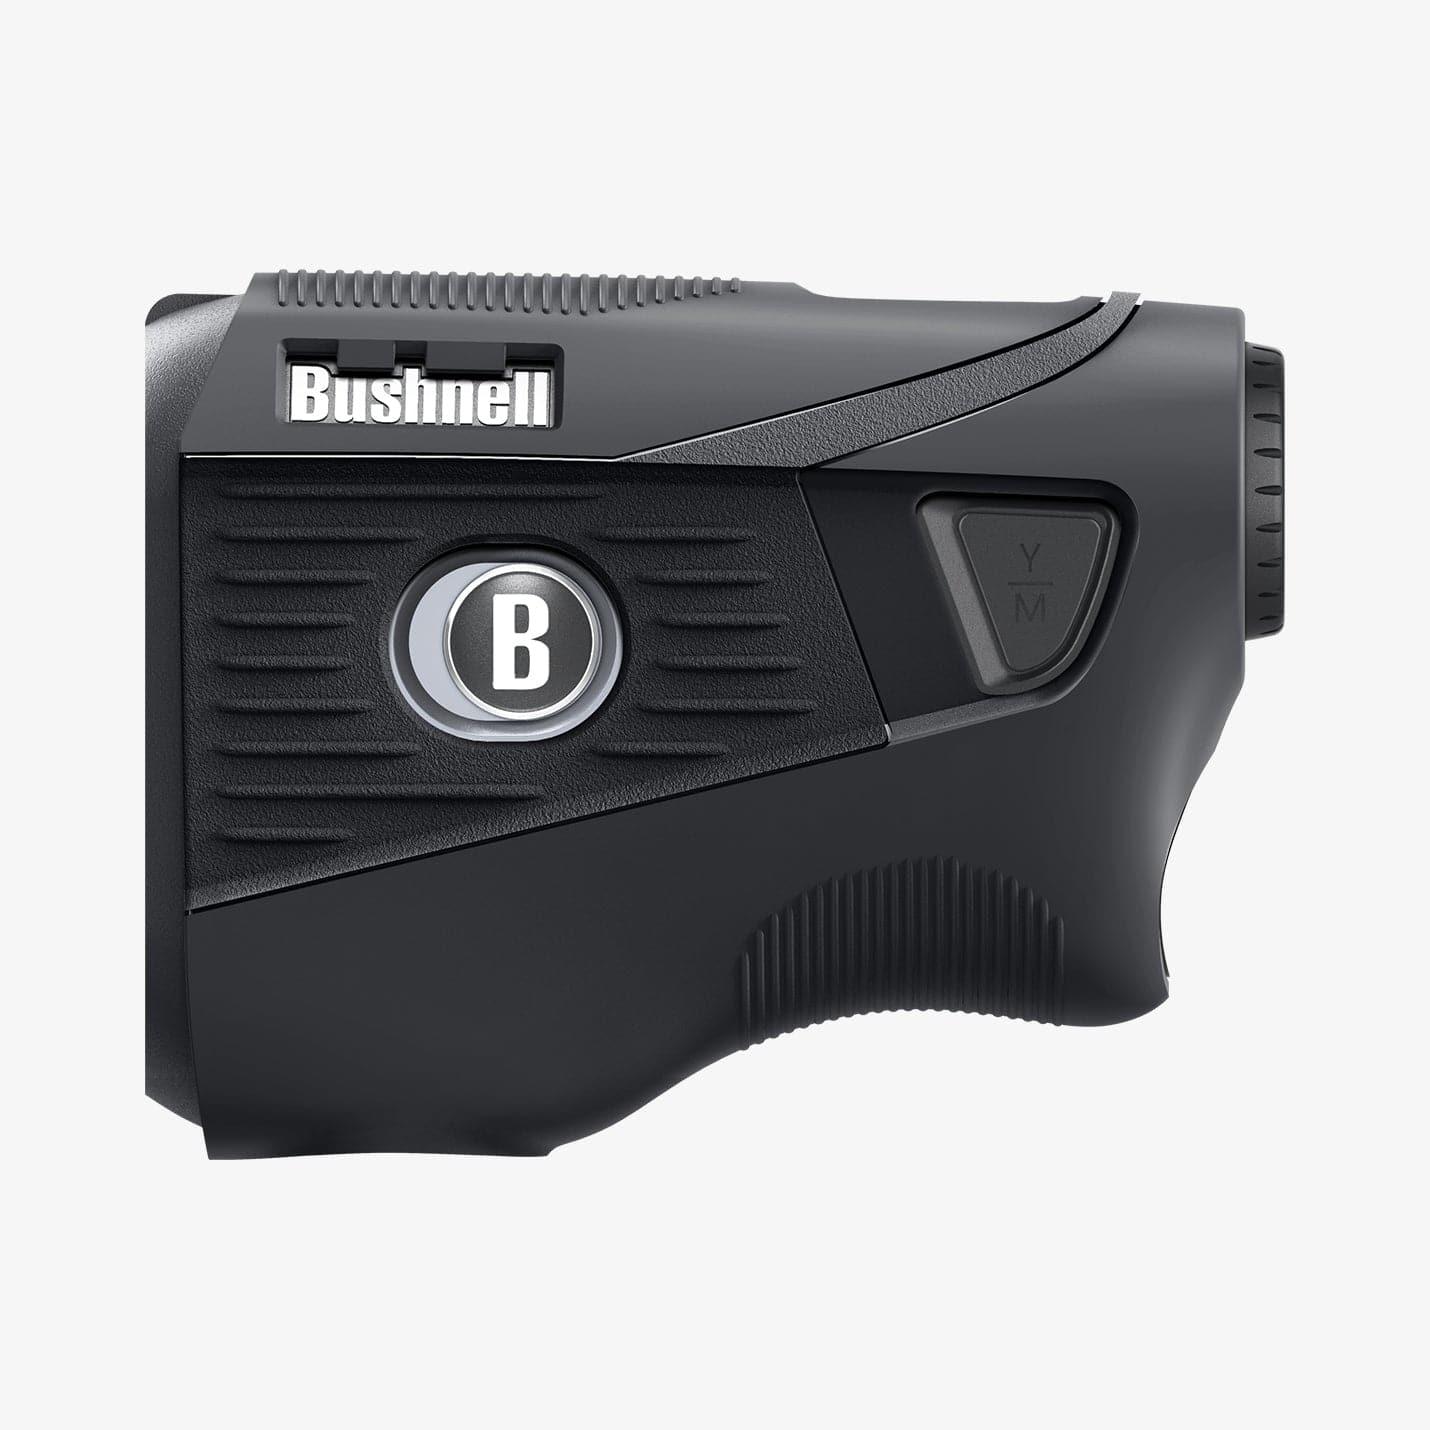 ACS04229 - Bushnell Tour V5 Shift Rangefinder AirTag Case in charcoal showing the side